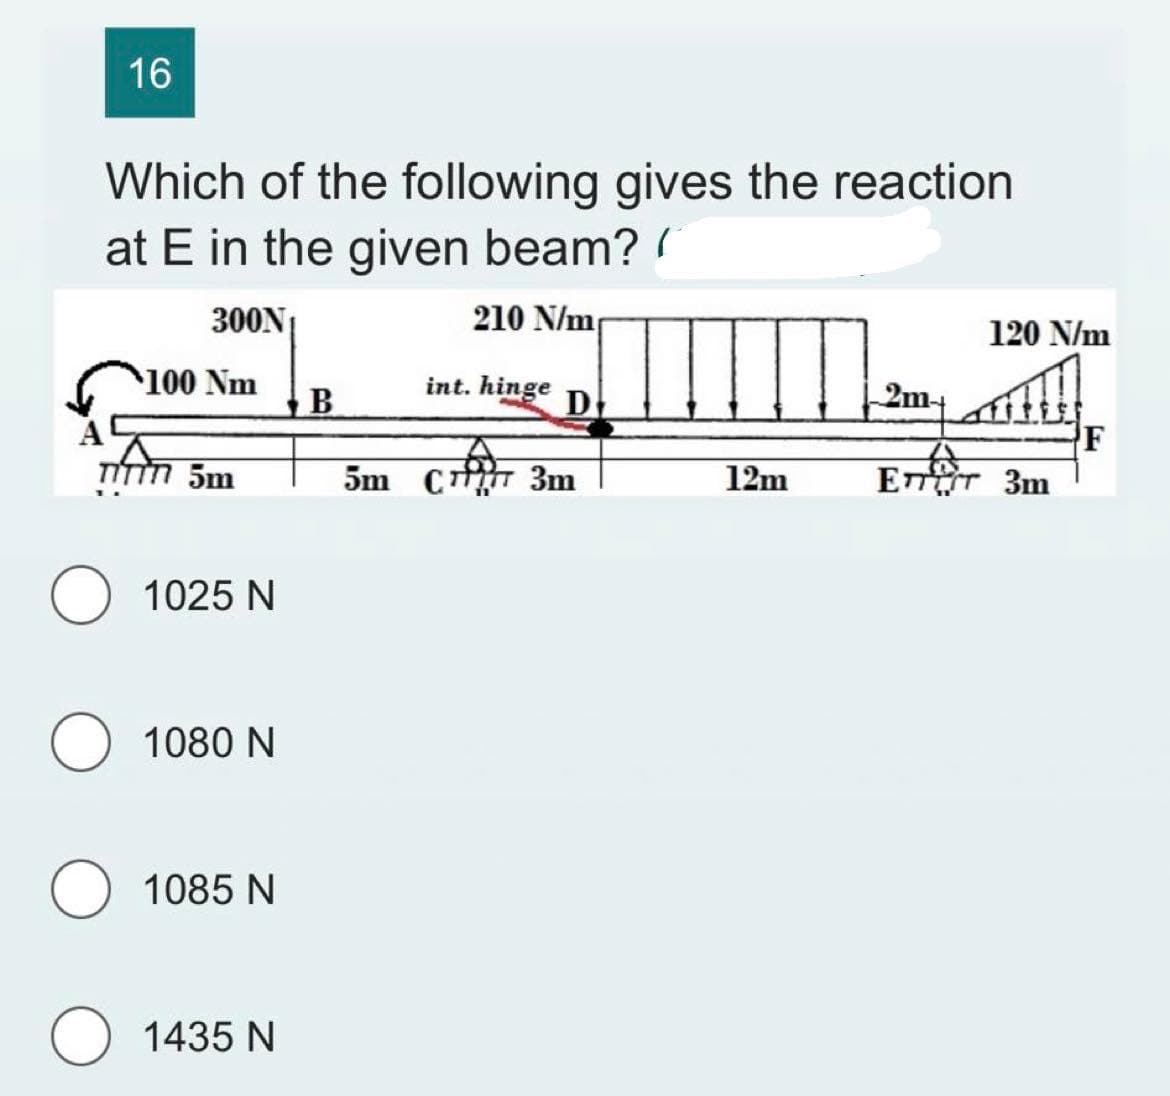 16
Which of the following gives the reaction
at E in the given beam? (
300N₁
210 N/m
100 Nm
TITTT 5m
1025 N
1080 N
1085 N
O 1435 N
B
int. hinge
D
5m C777 3m
12m
2m-
120 N/m
ETTET 3m
F